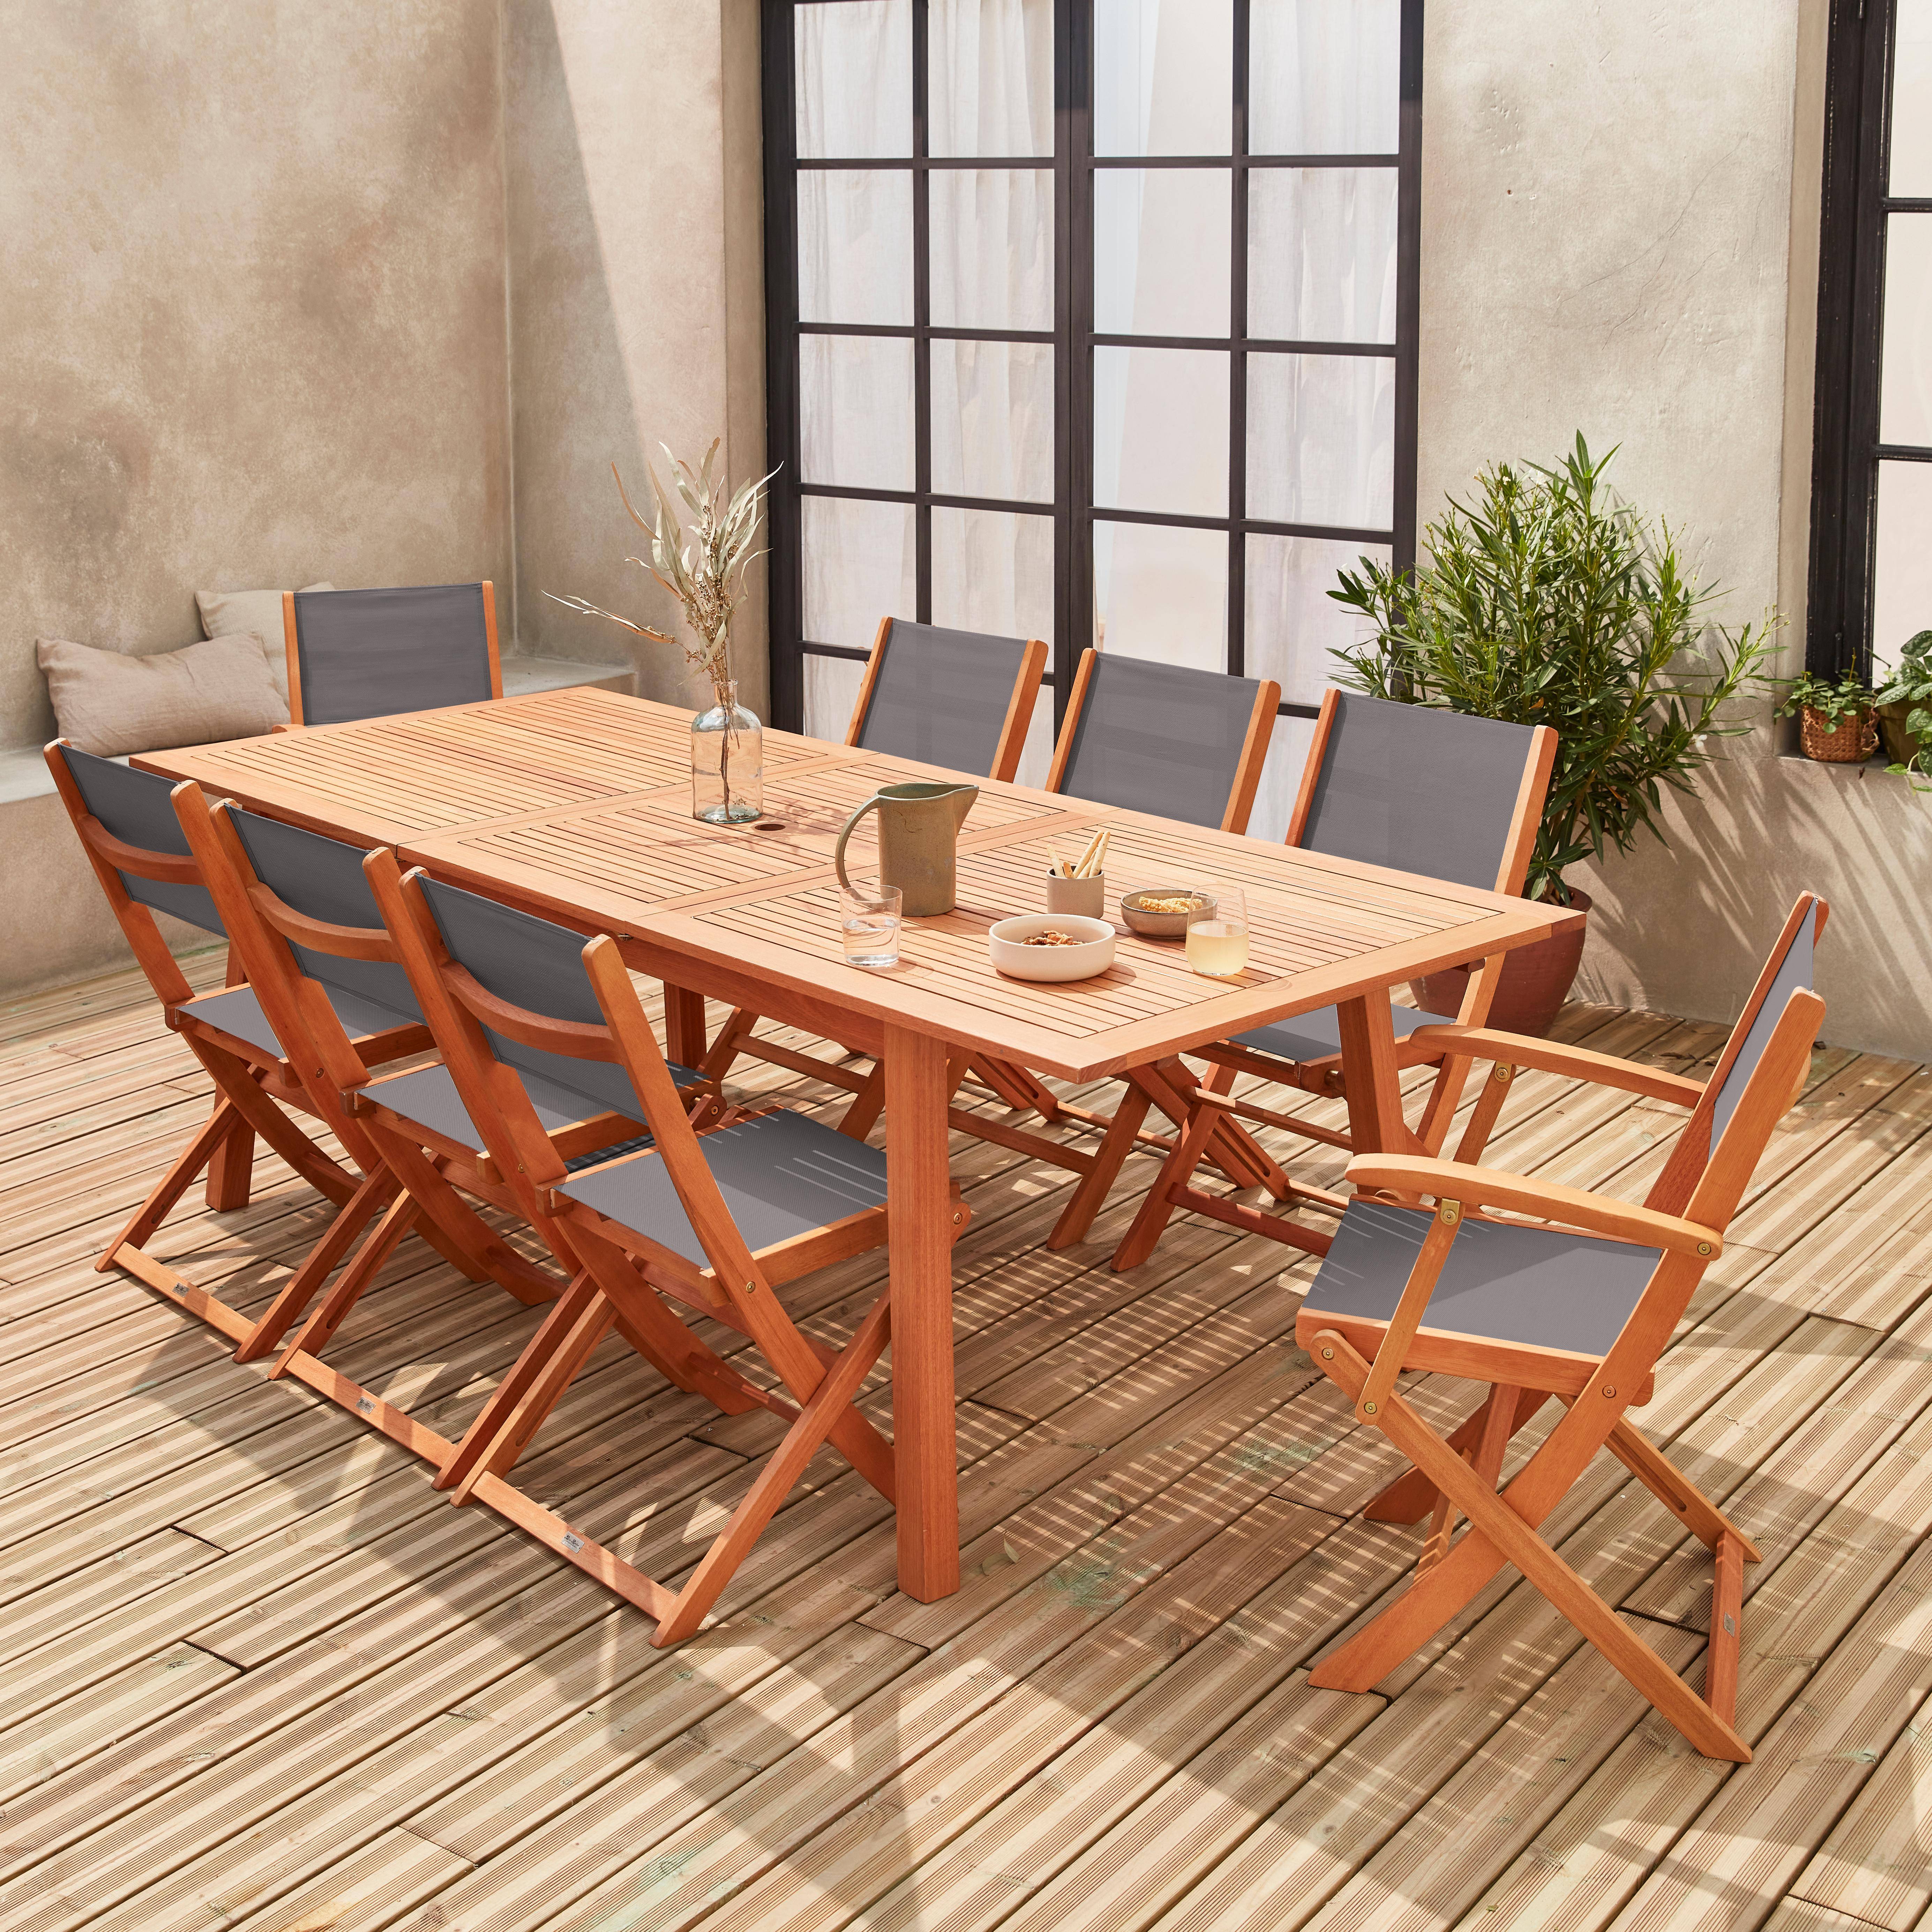 8-seater garden dining set, extendable 180-240cm FSC-eucalyptus wooden table, 6 chairs and 2 armchairs - Almeria 8 - Anthracite textilene seats,sweeek,Photo1